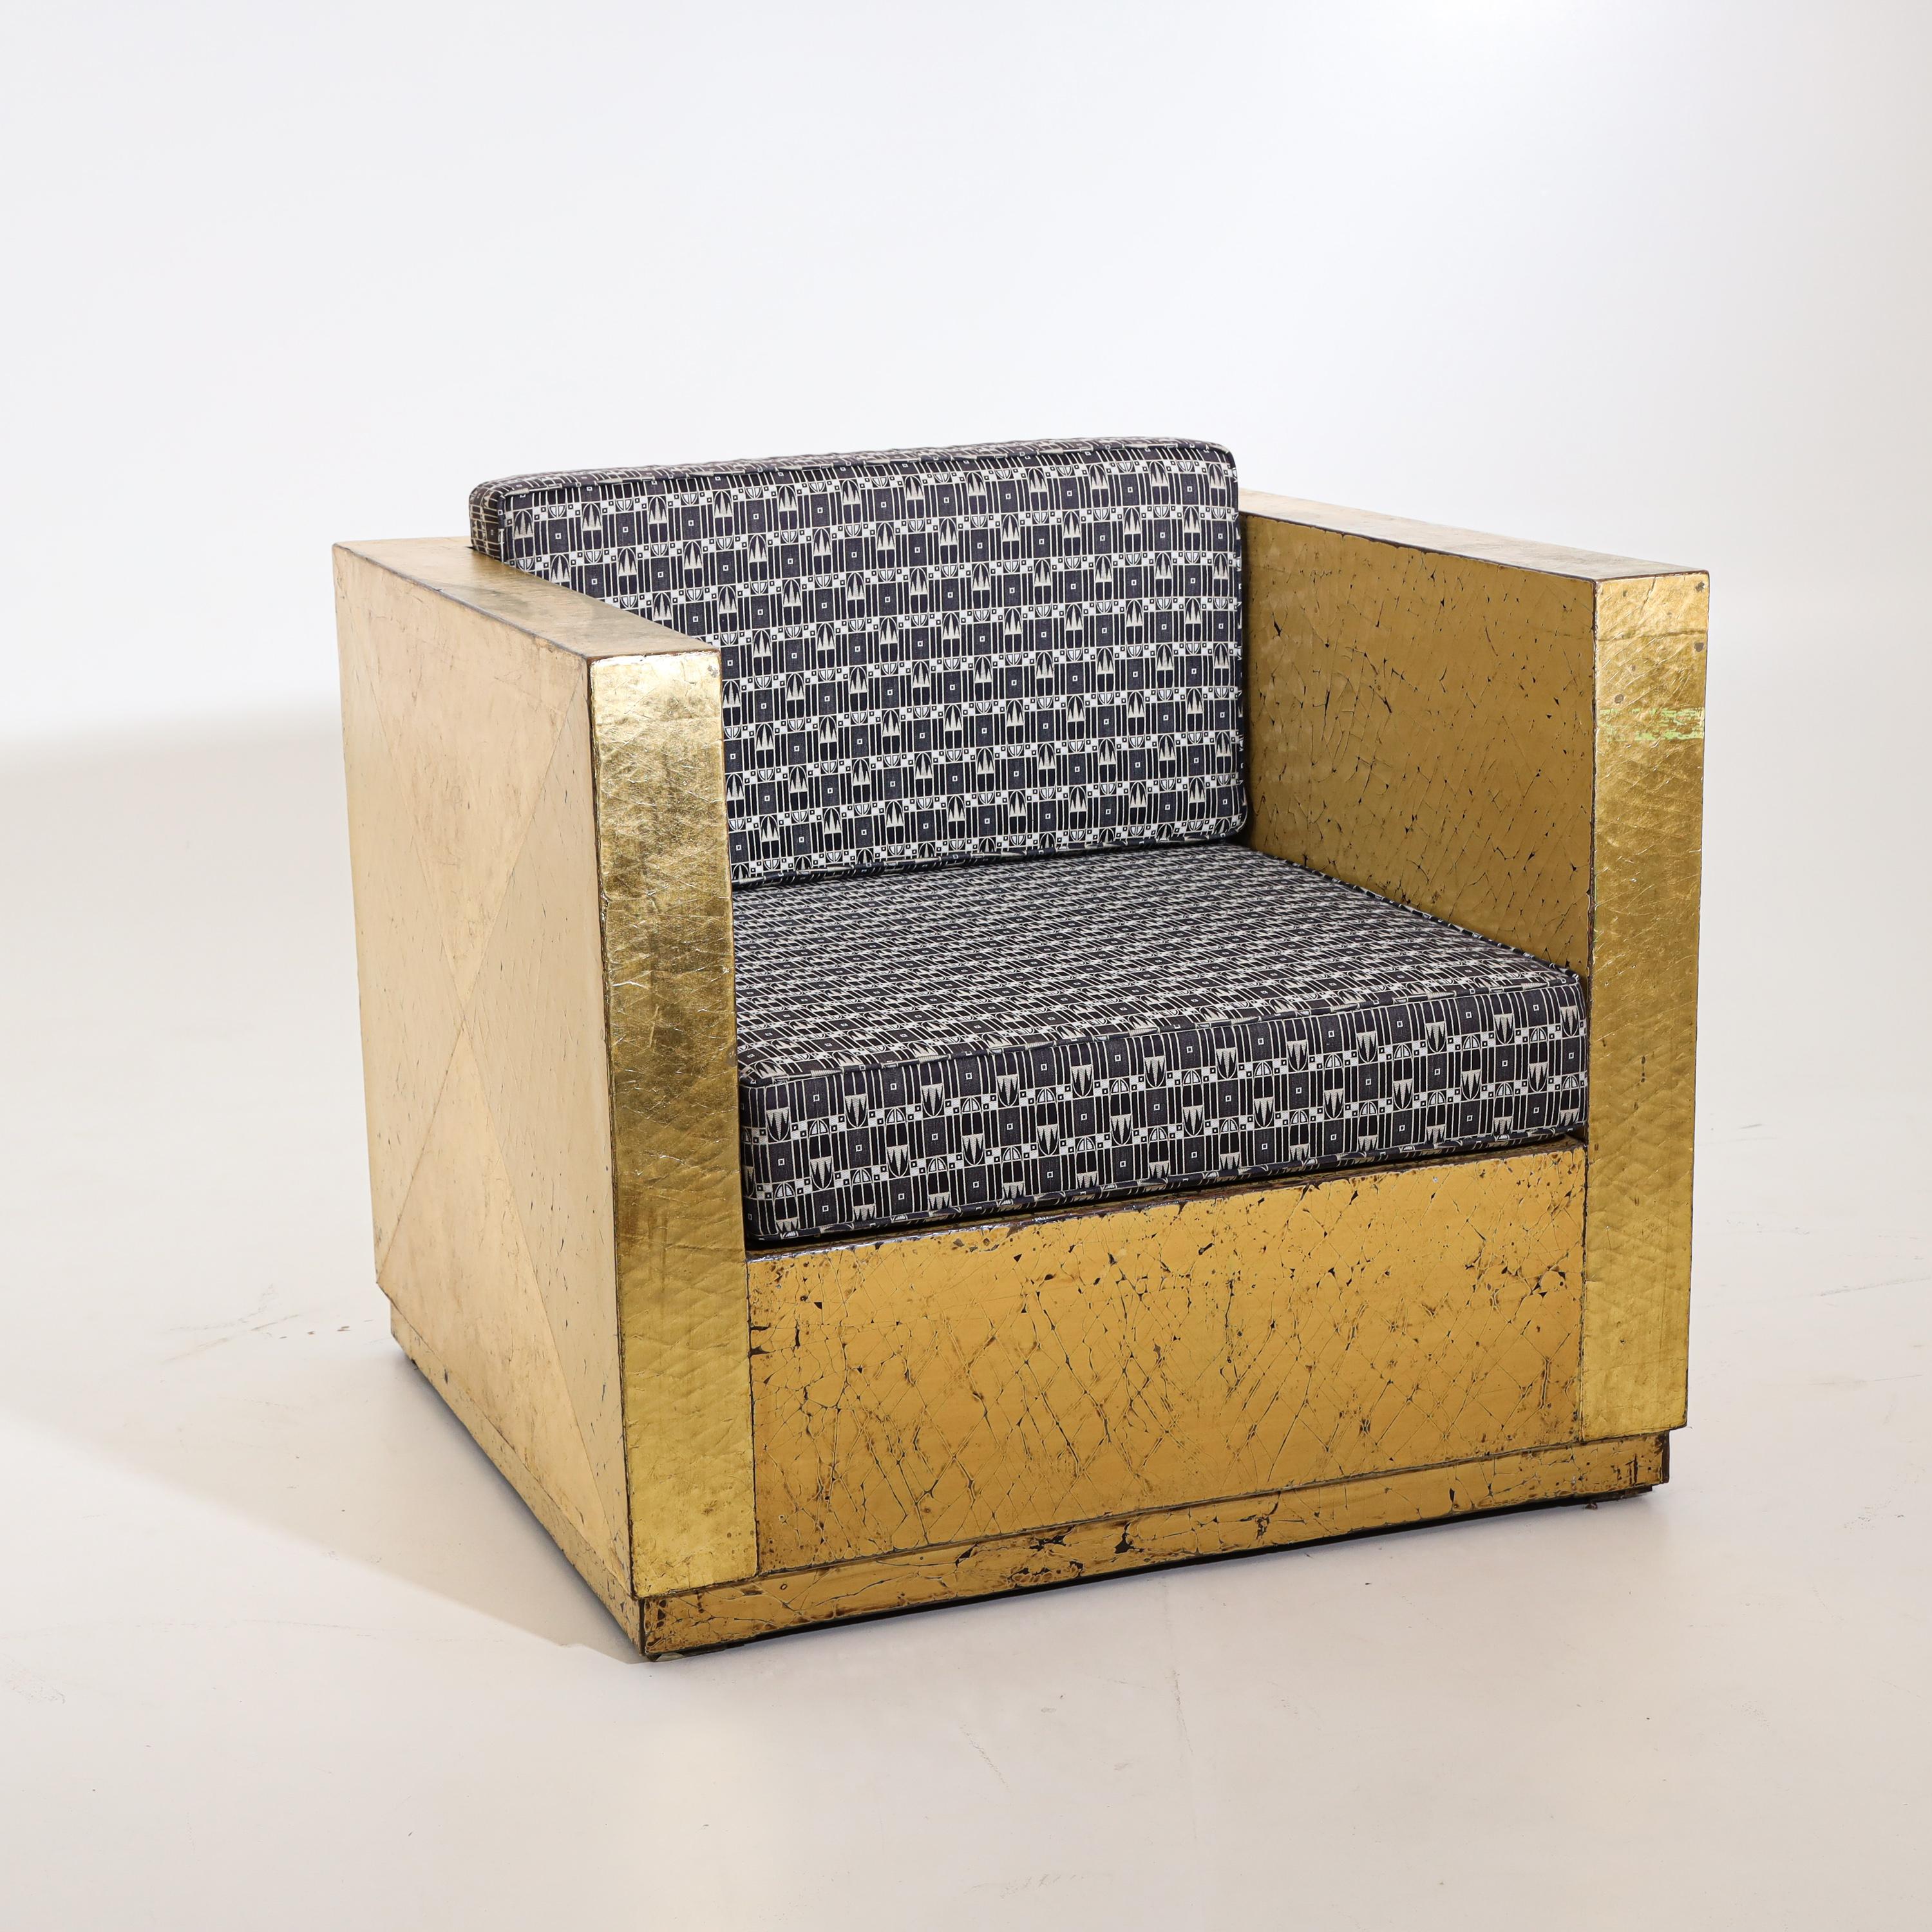 Pair of armchairs with gold patinated frame, straight armrests and seat cushions in Art Deco style. Very nice patina and geometrically constructed design on the sides, worn in places.
  